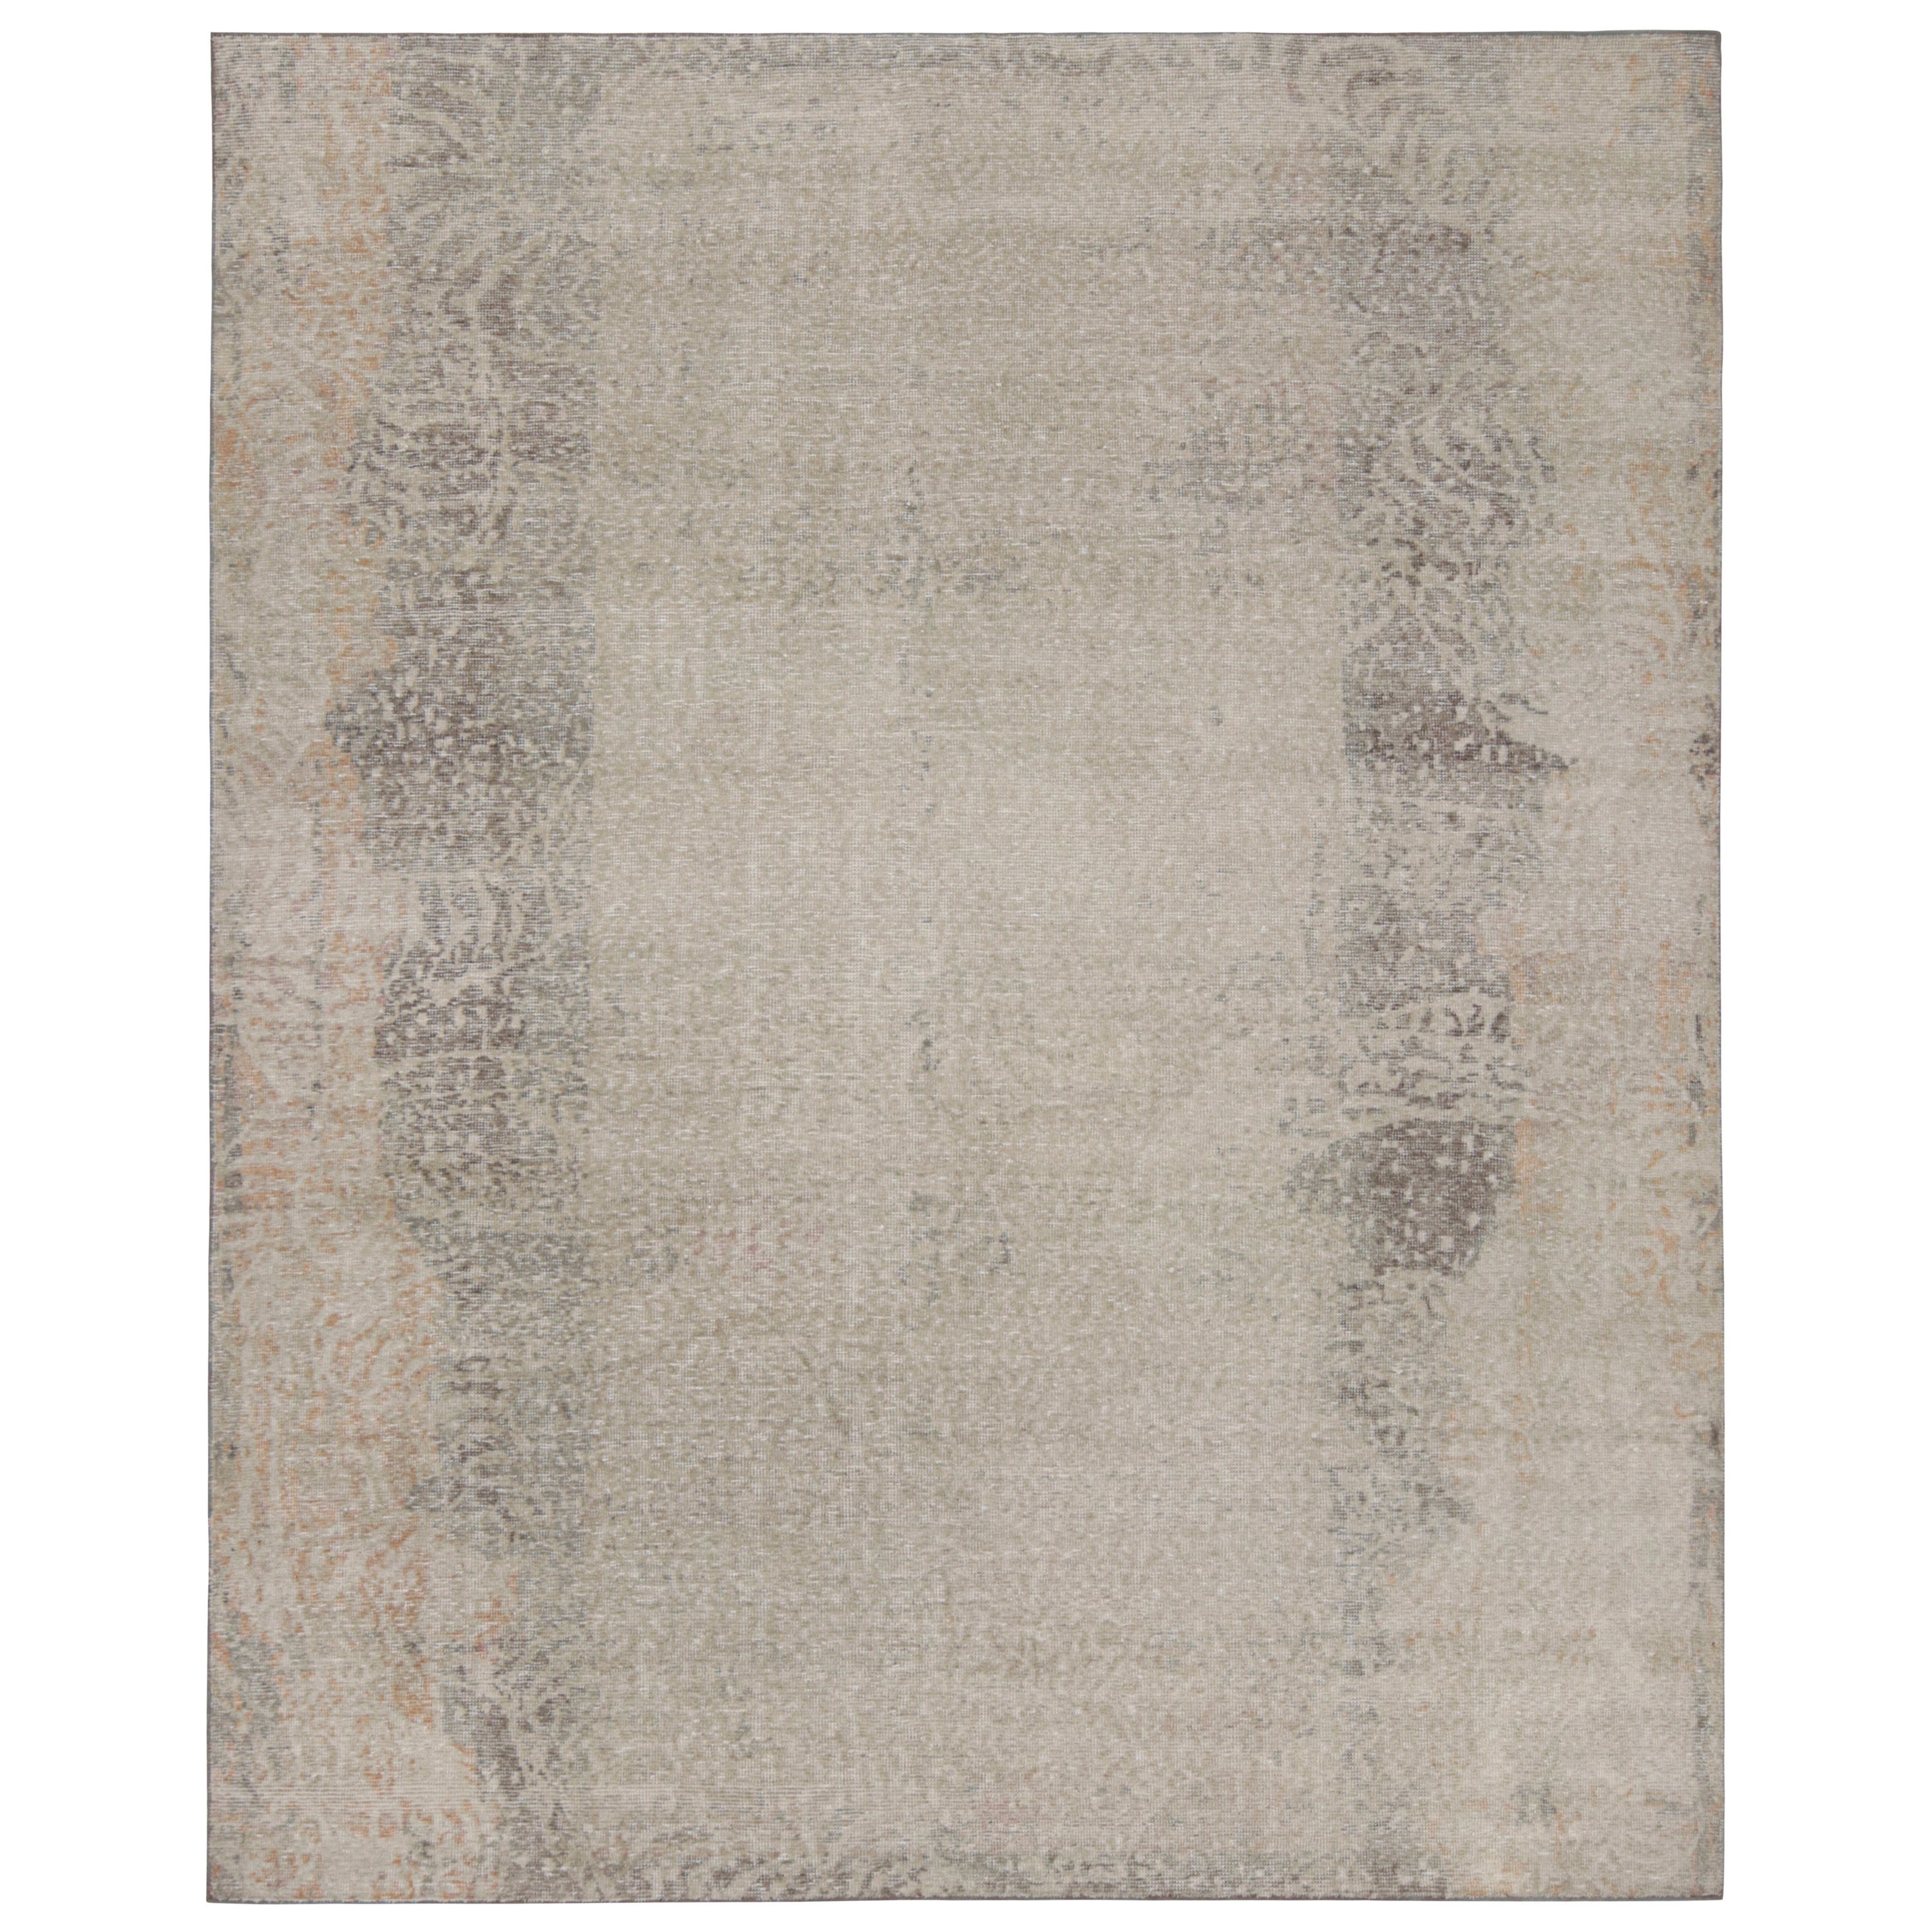 Rug & Kilim's Contemporary Abstract Rug in Taupe and Rust (tapis abstrait contemporain en taupe et rouille) en vente